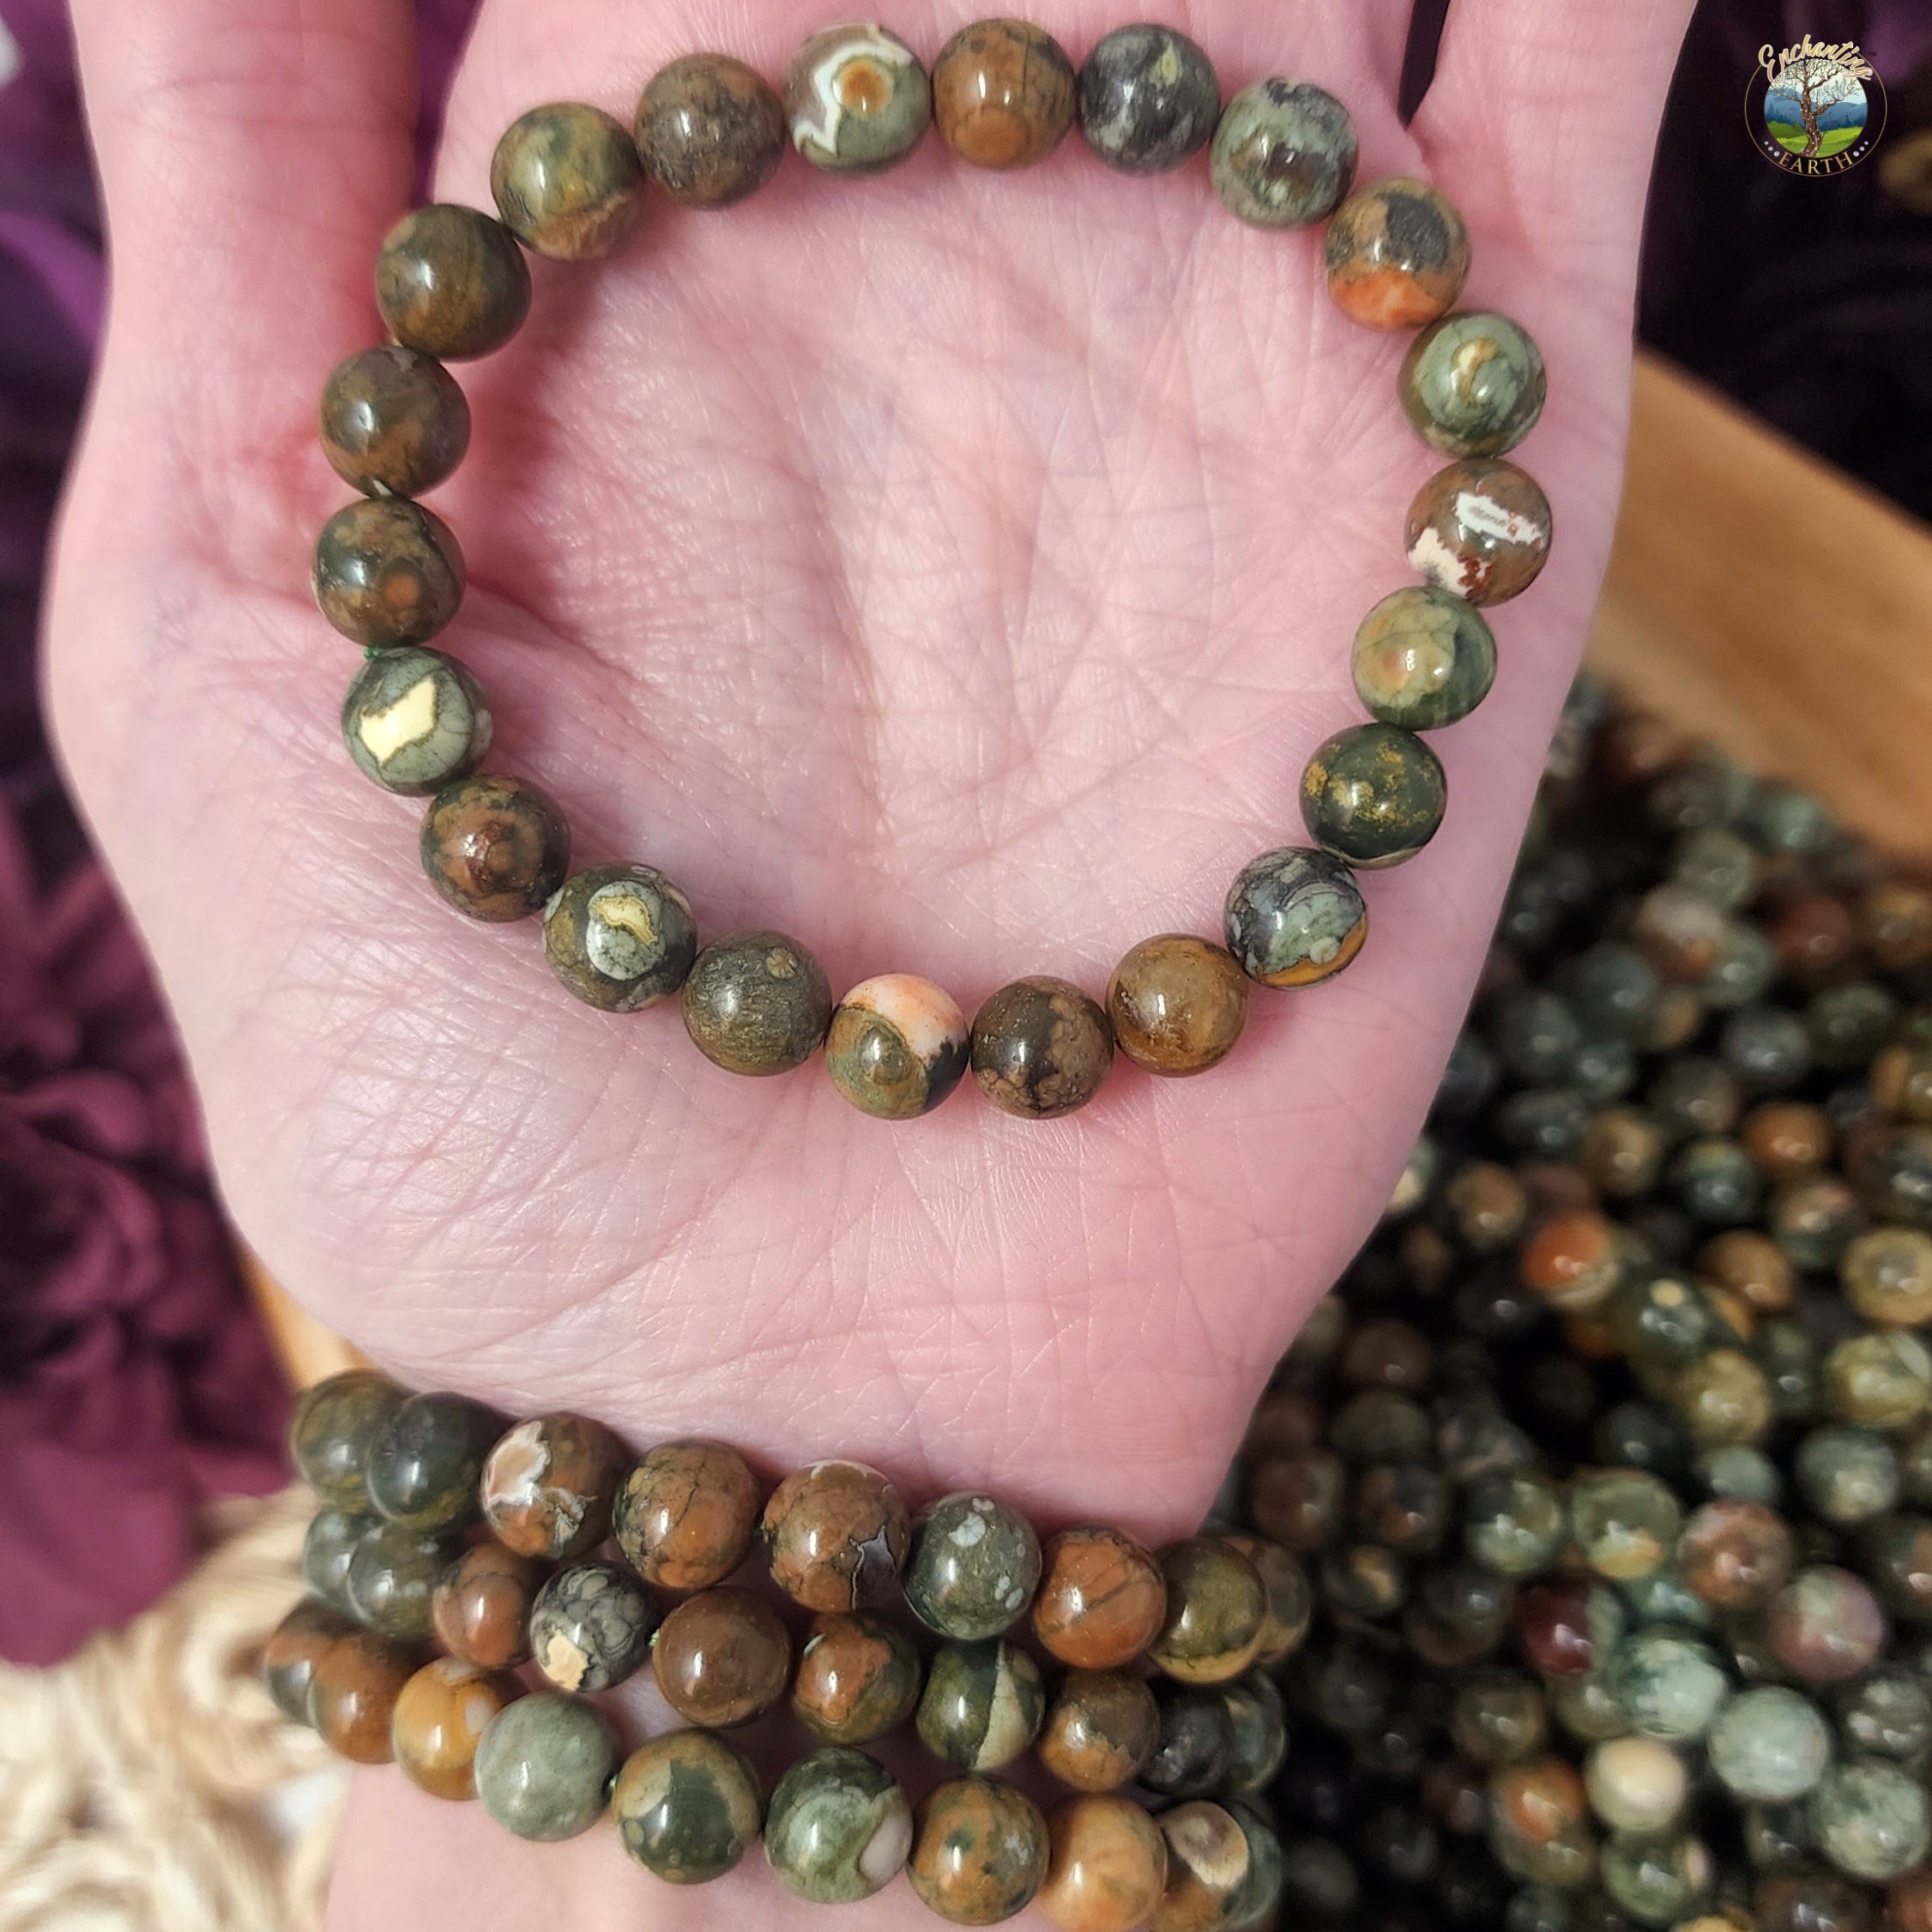 Rhyolite Bracelet for Support through Change, Strength and Self Esteem